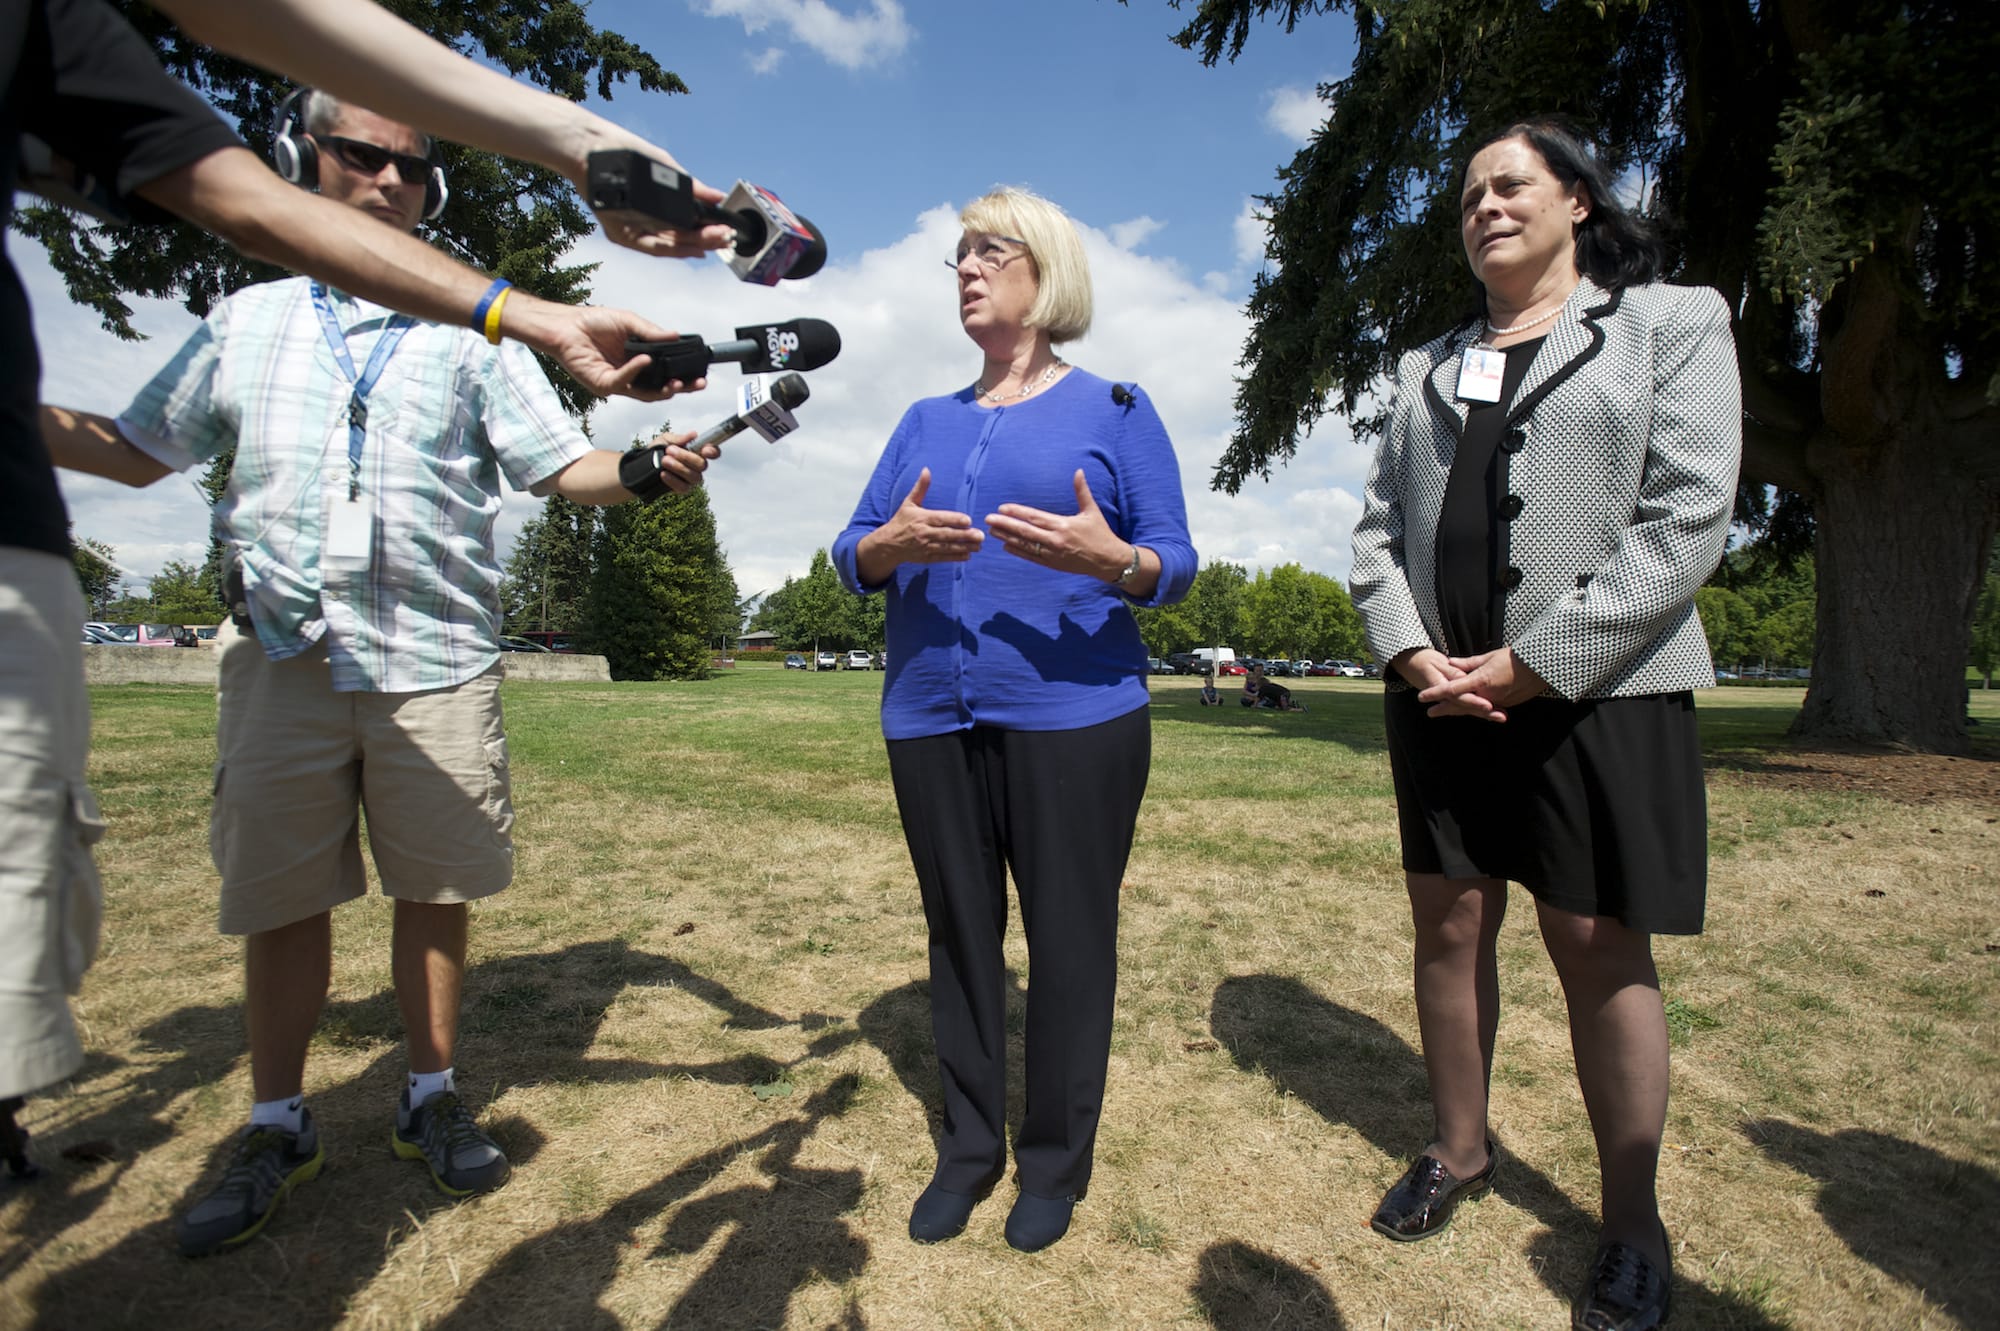 After touring the Vancouver Veterans Affairs campus, U.S. Sen. Patty Murray, D-Wash., left, says there is progress in helping veterans access care.